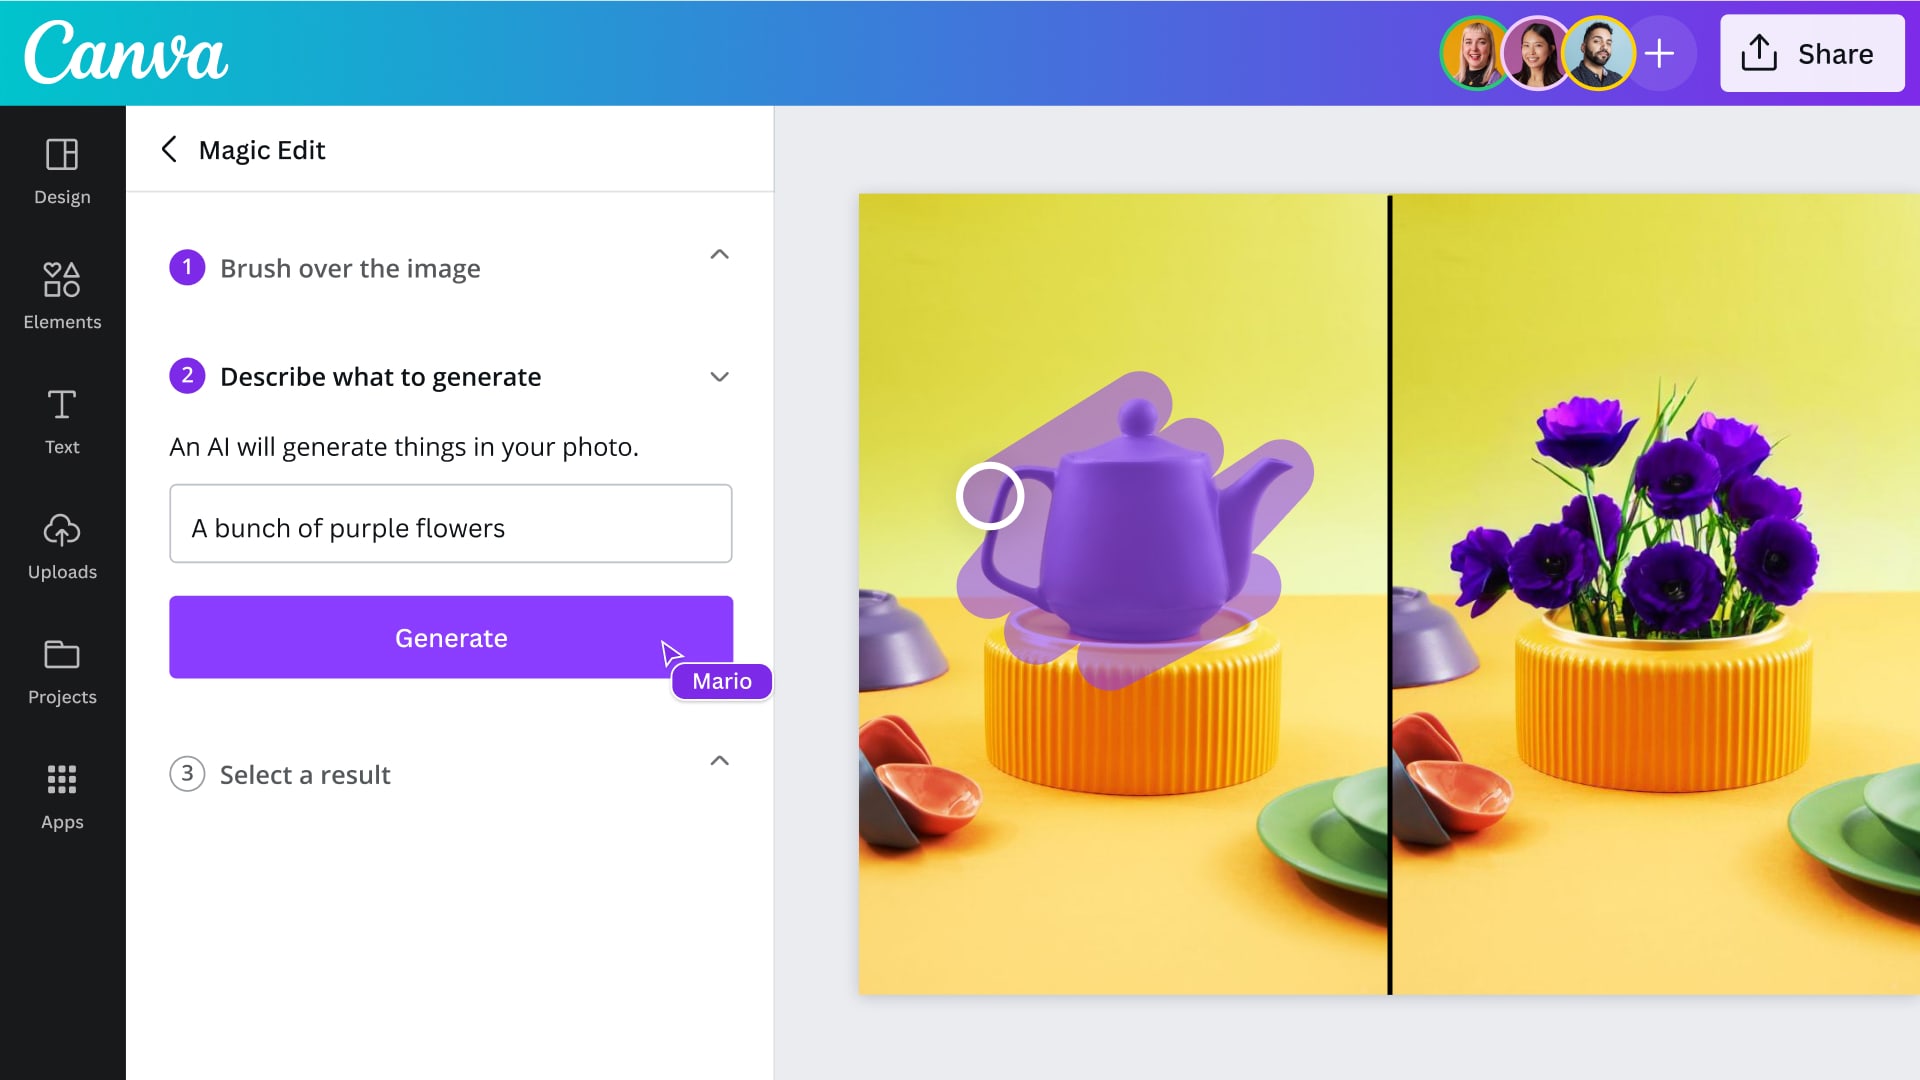 Canva's new suite of artificial intelligence-powered editing tools include Magic Edit, which allows images to be replaced with AI-generated alternatives.